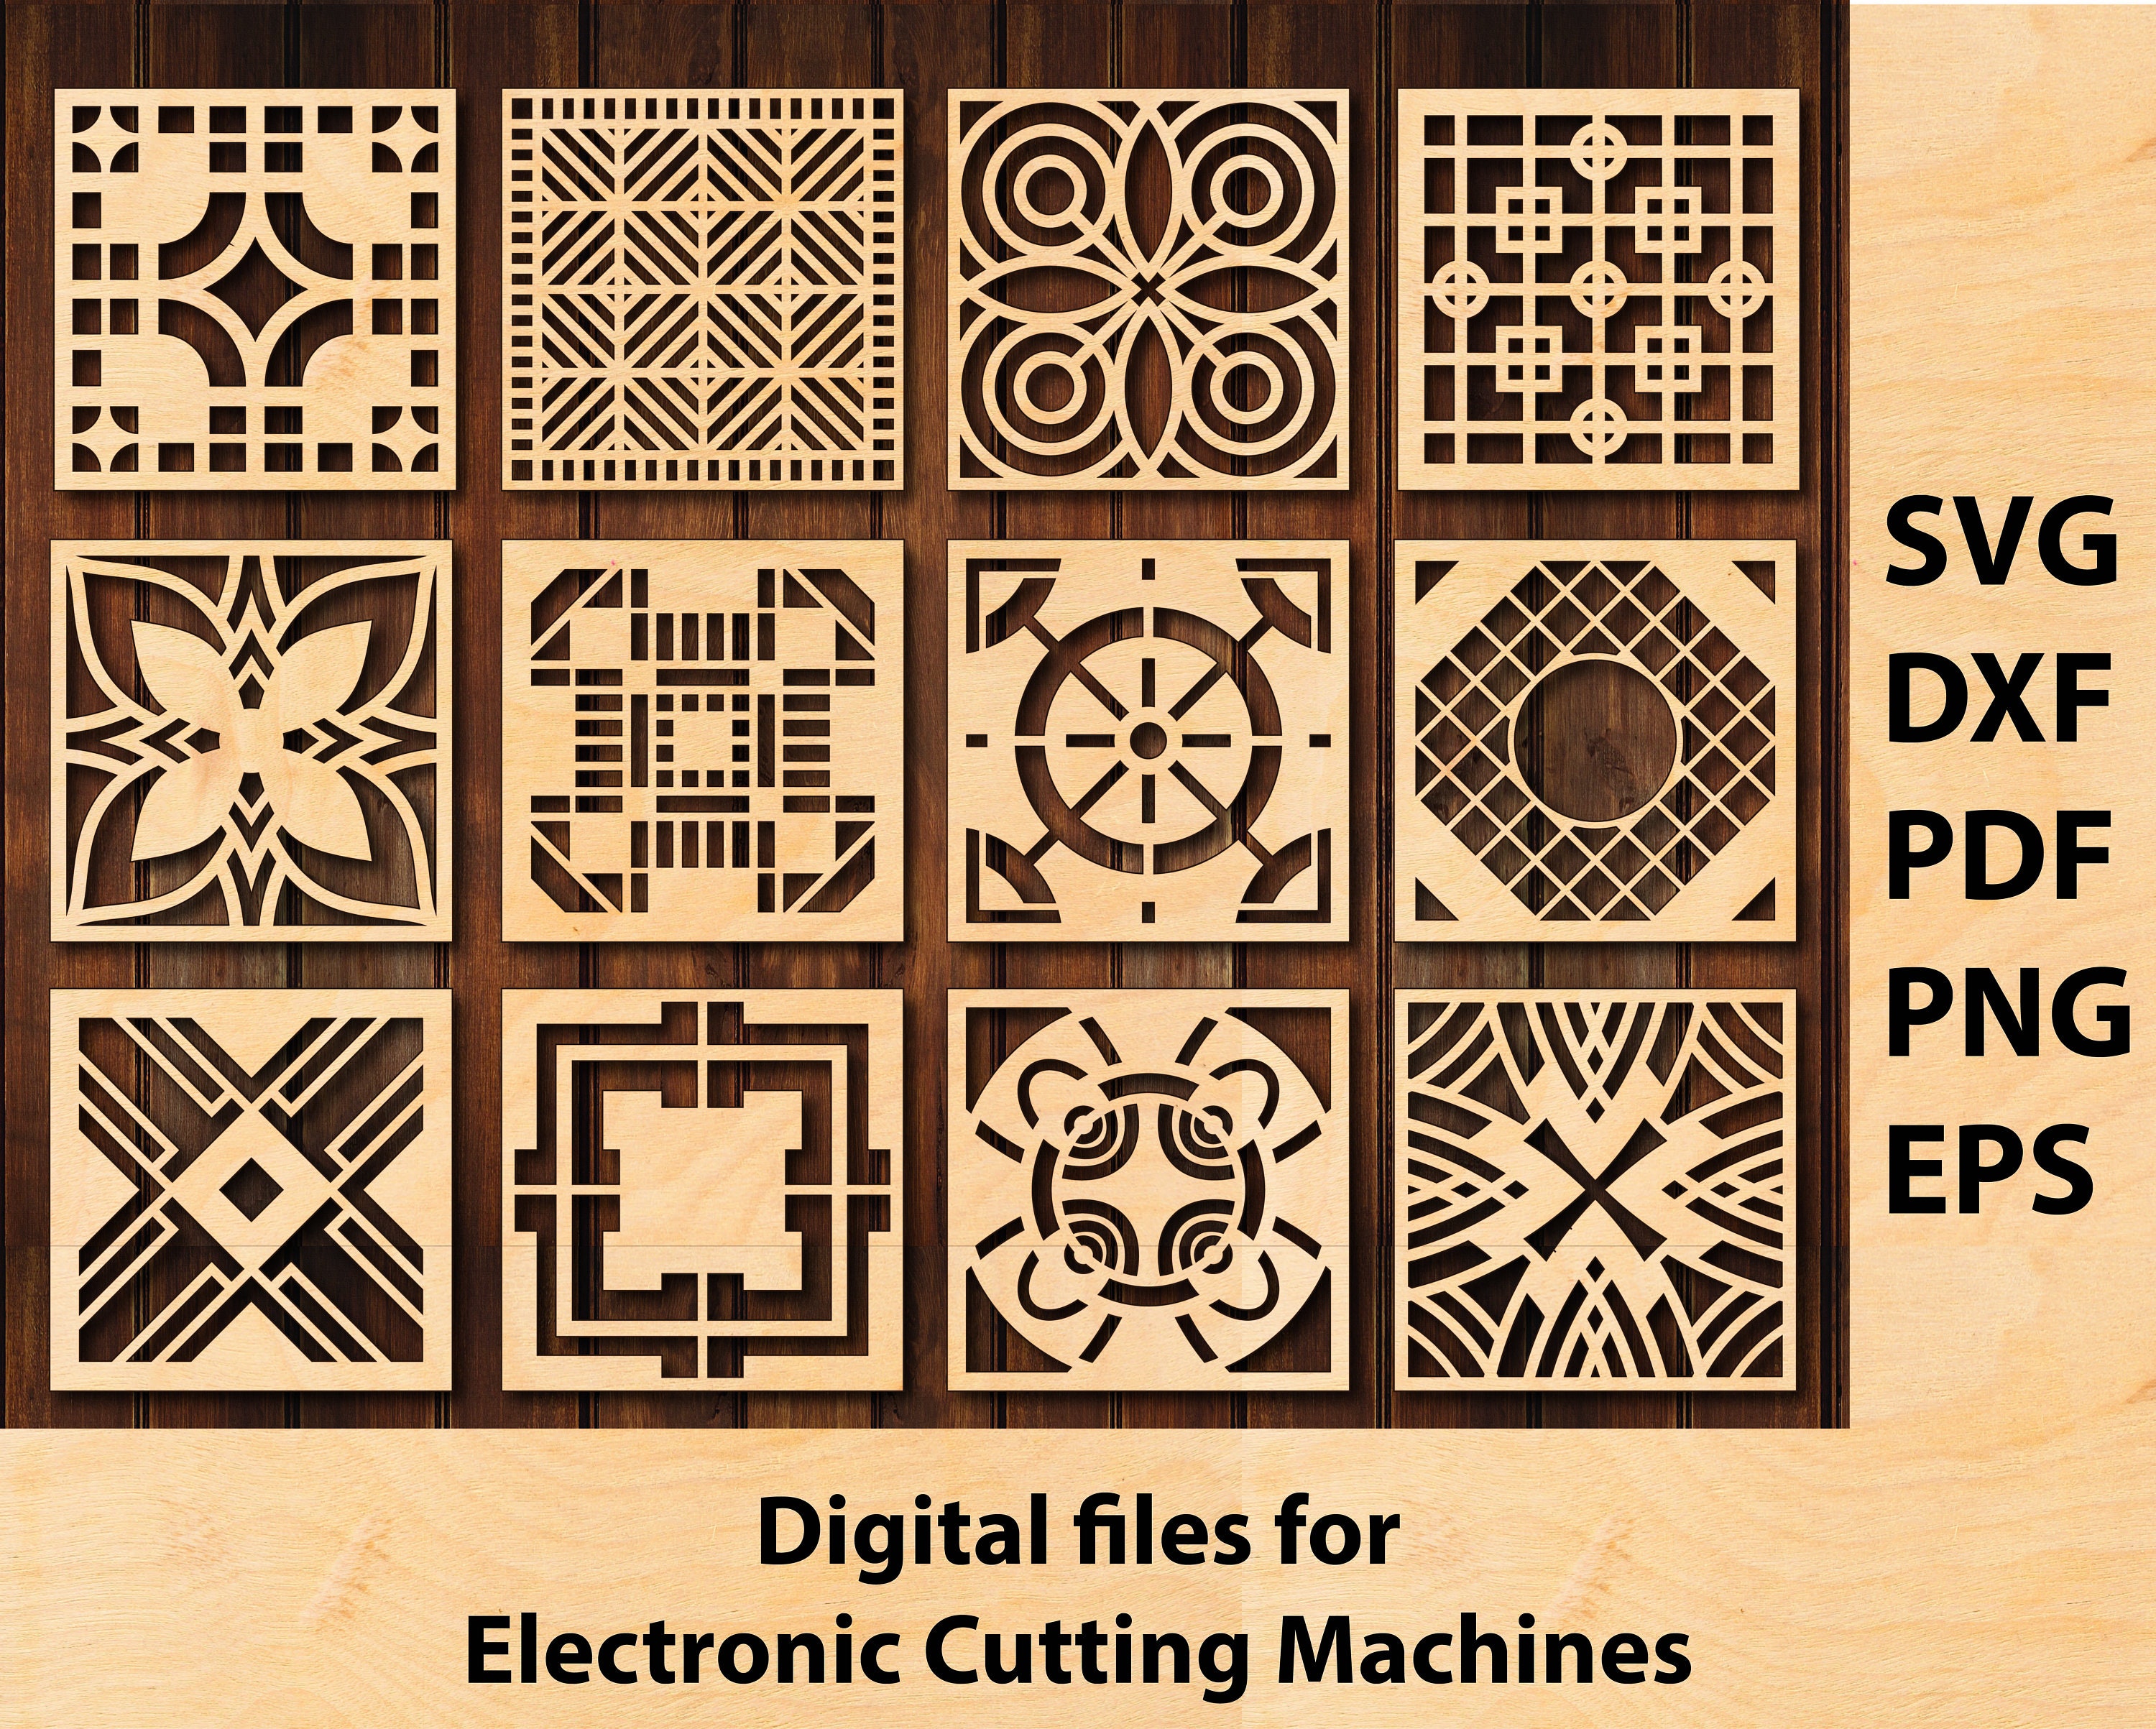 Square Coaster Templates Cut Files Graphic by SeaquintDesign